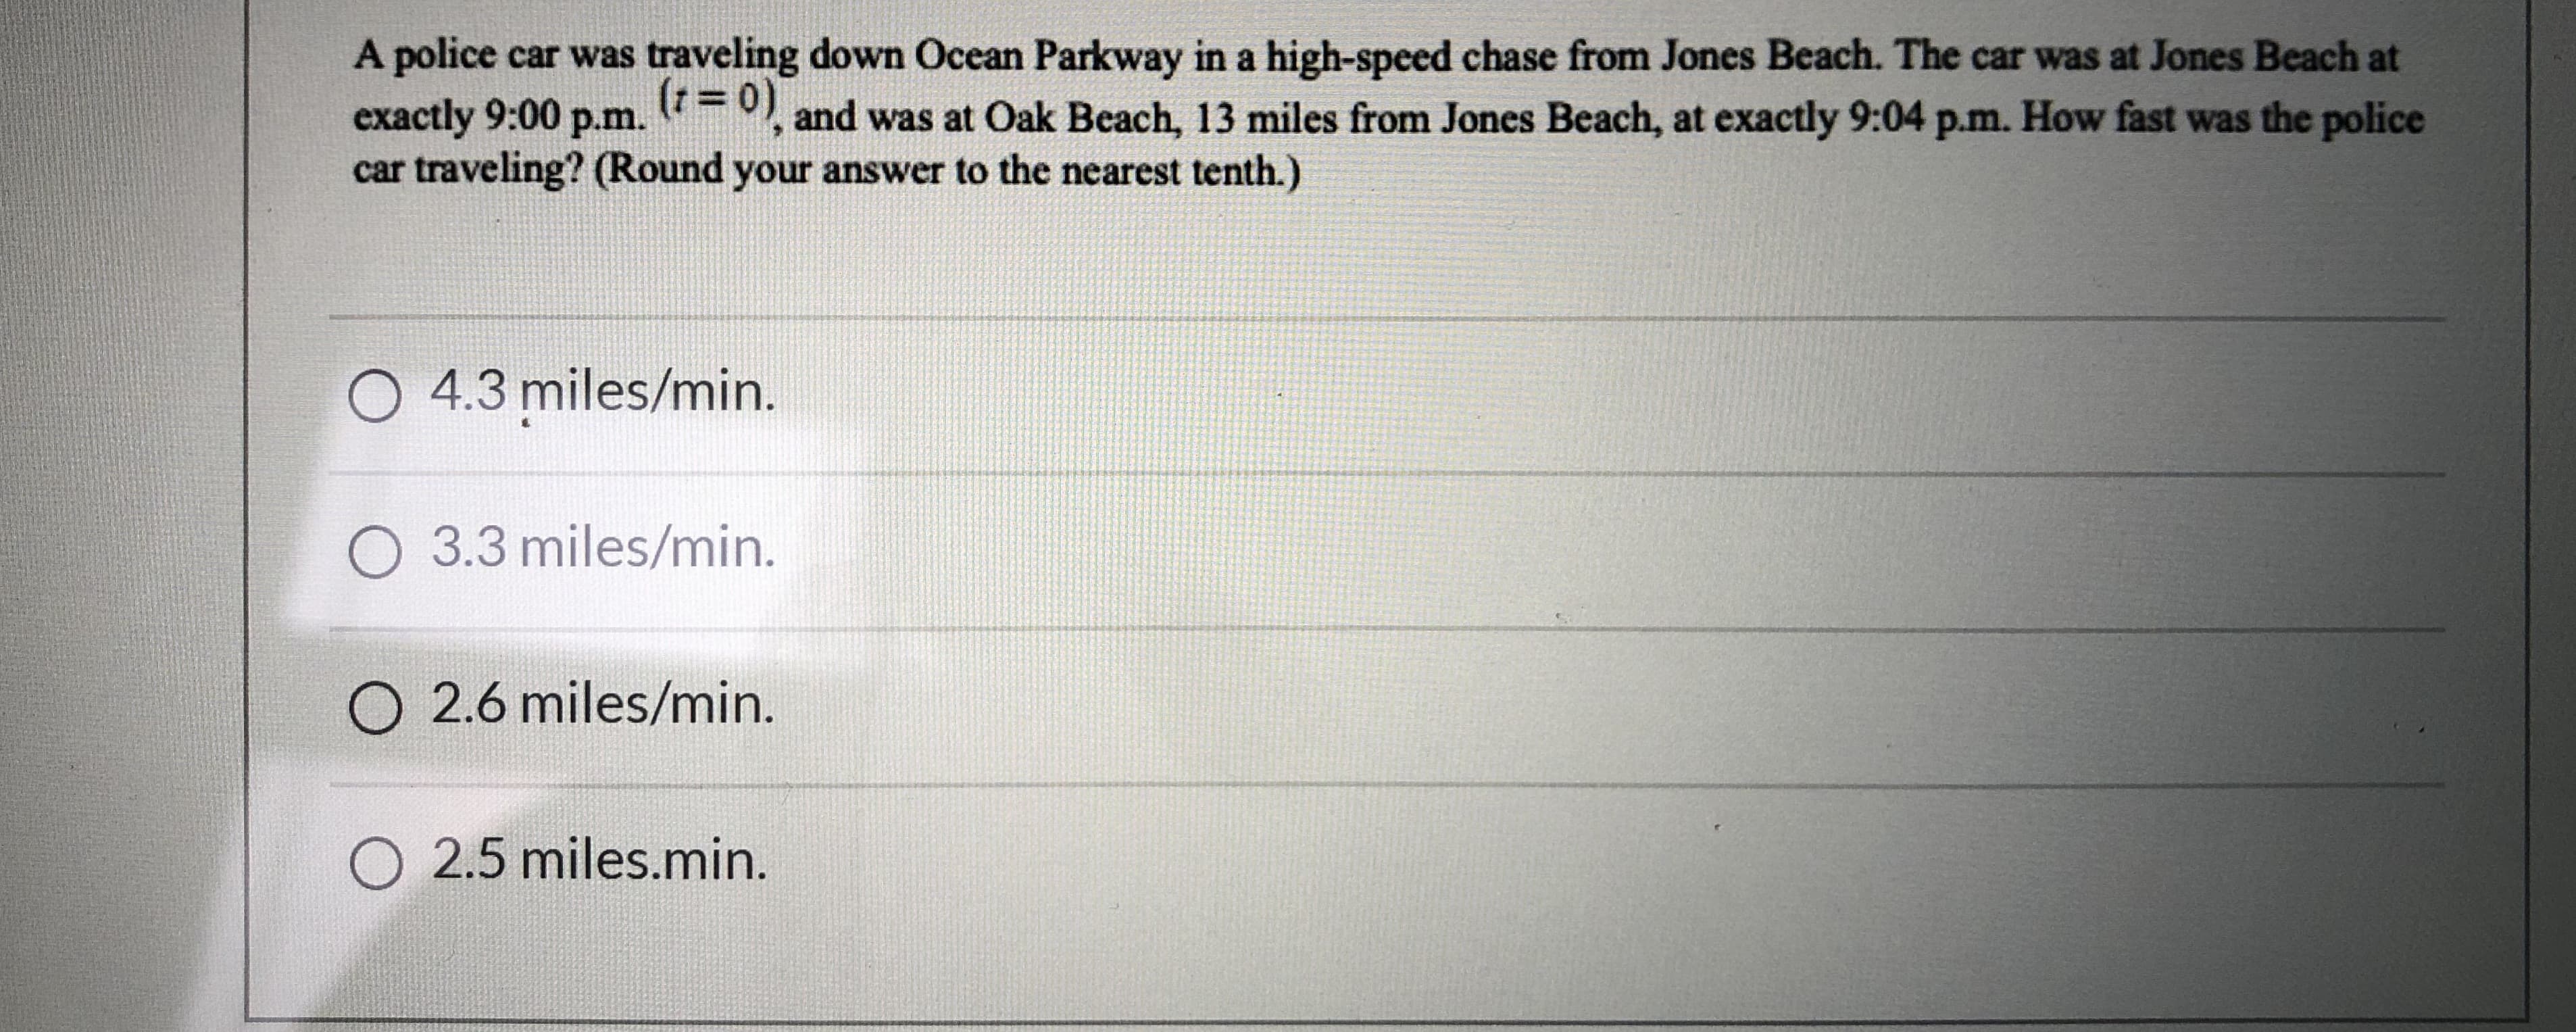 A police car was traveling down Ocean Parkway in a high-speed chase from Jones Beach. The car was at Jones Beach at
(r= 0) and was at Oak Beach, 13 miles from Jones Beach, at exactly 9:04 p.m. How fast was the police
exactly 9:00 p.m.
car traveling? (Round your answer to the nearest tenth.)
